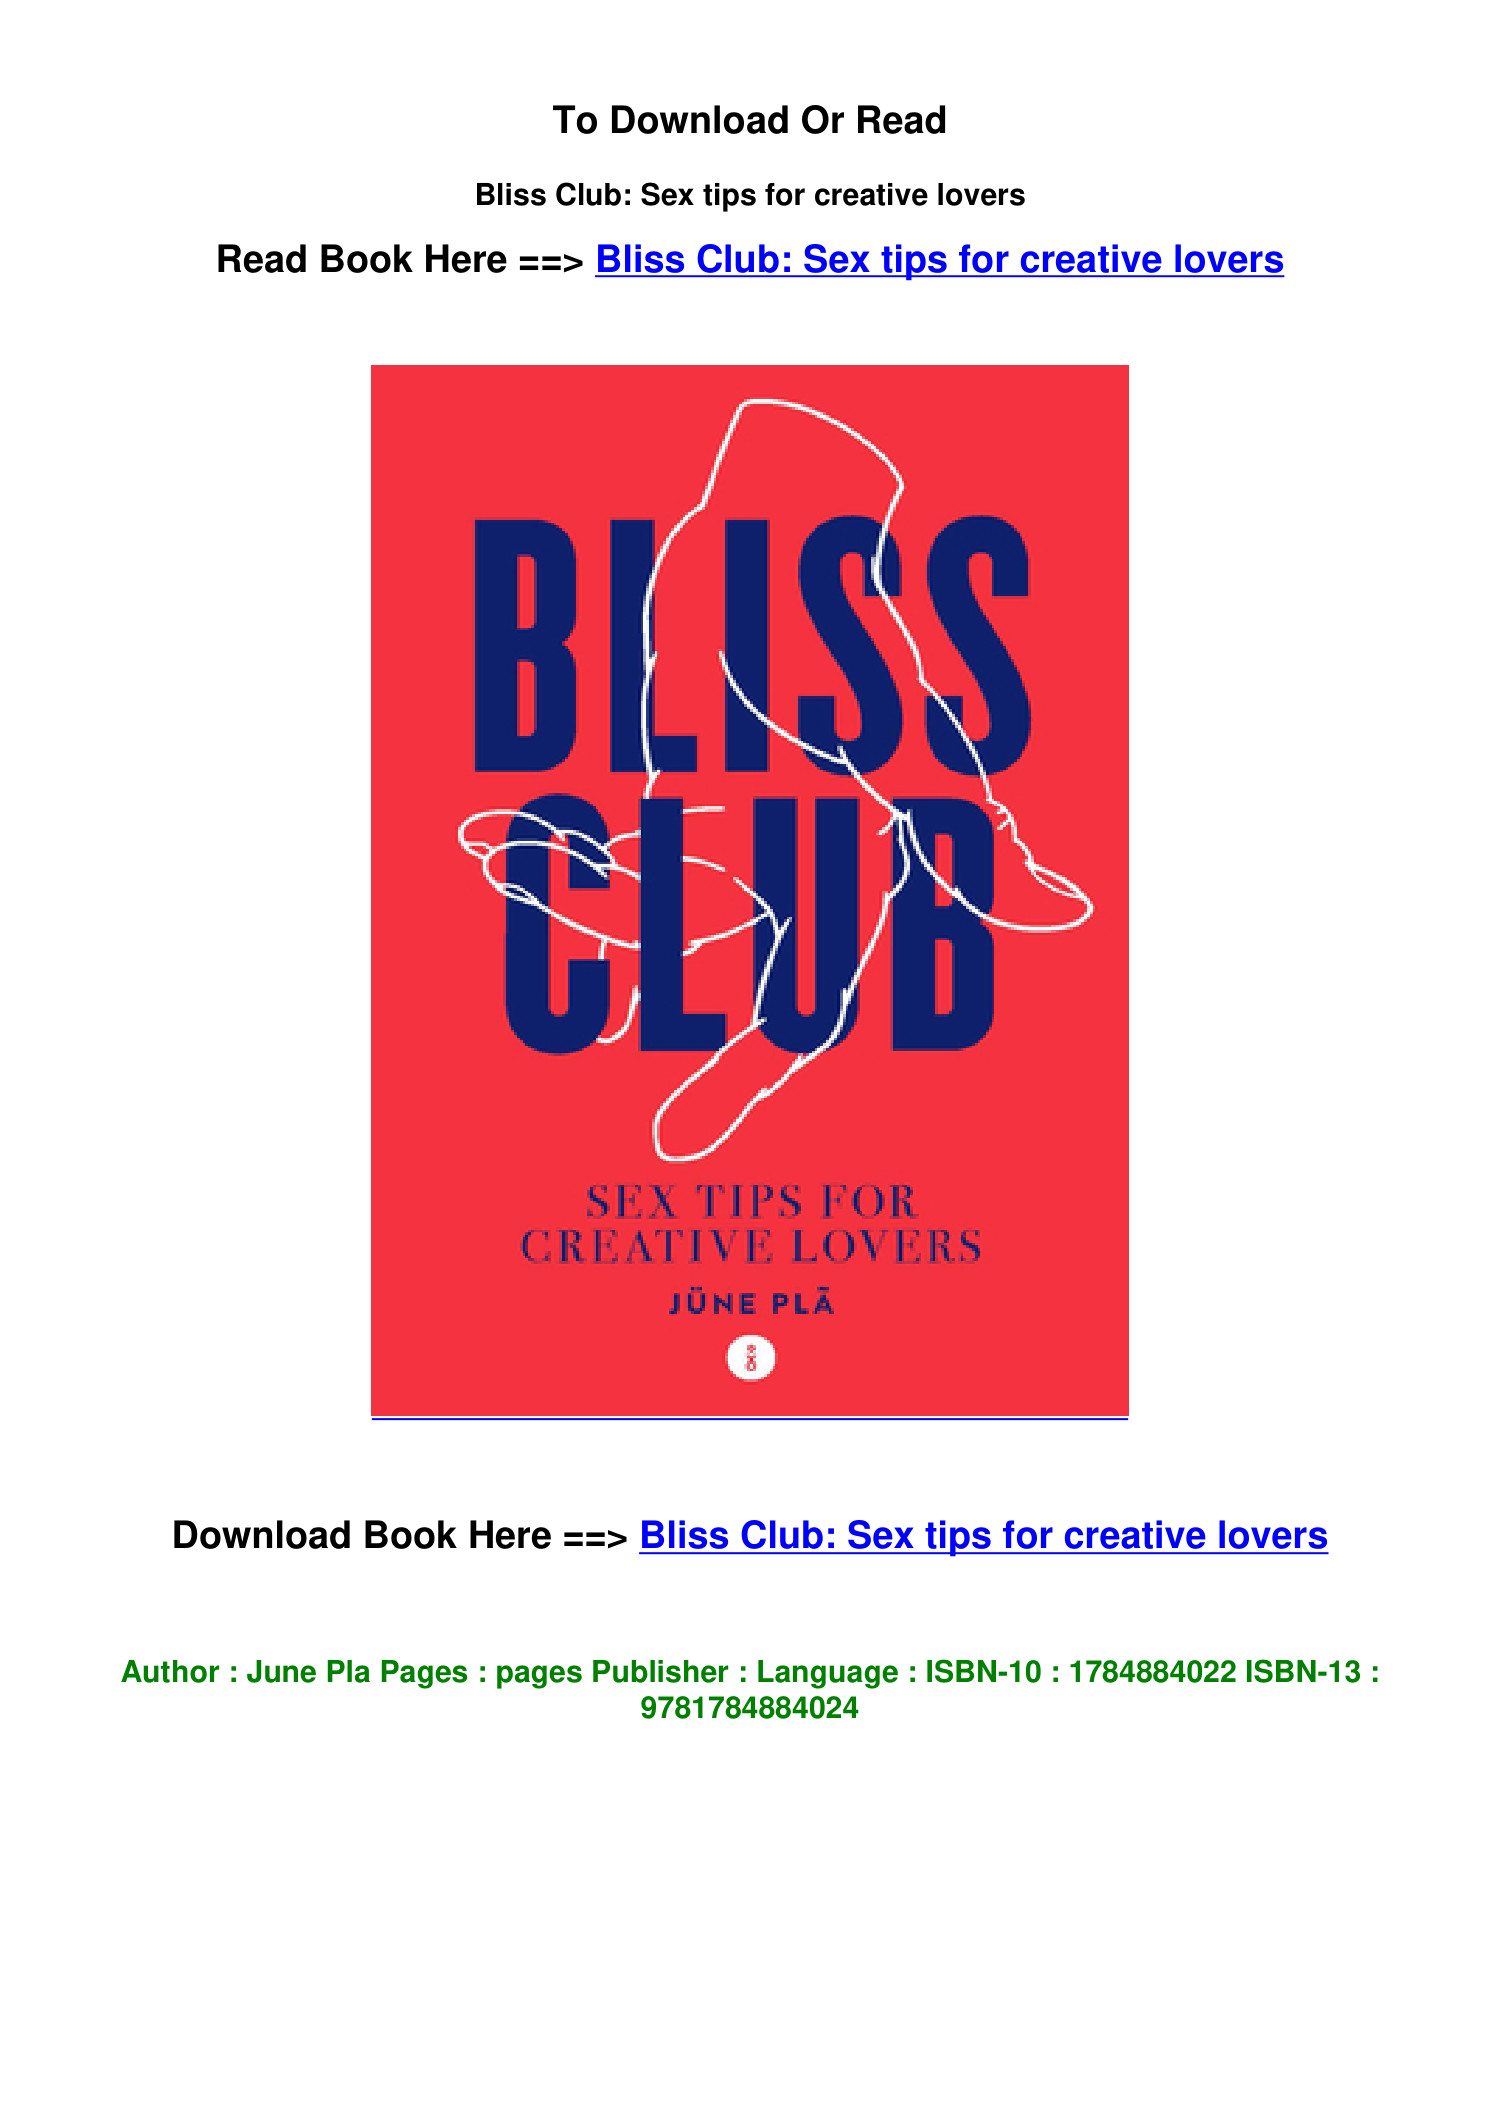 https://www.docdroid.net/file/view/jENfqjD/download-epub-bliss-club-sex-tips-for-creative-lovers-by-june-pla-pdf.jpg